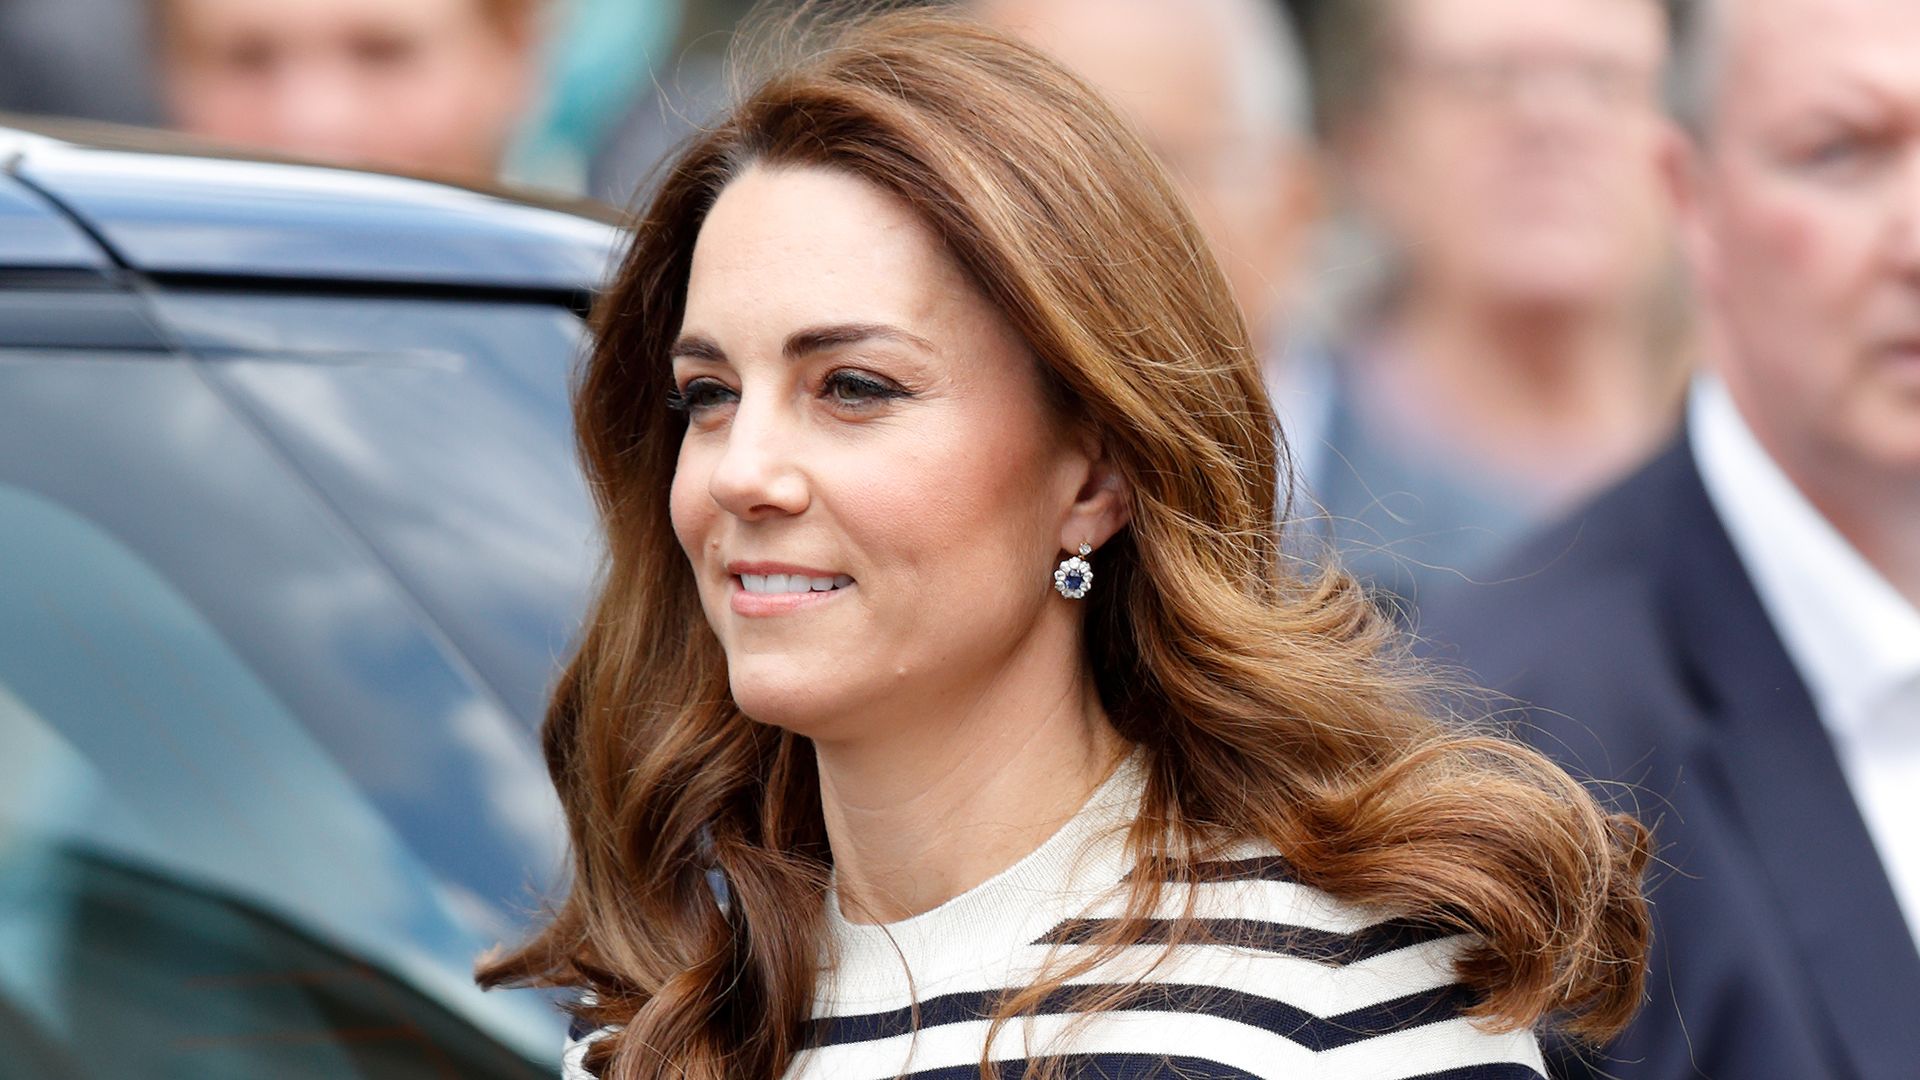 LONDON, UNITED KINGDOM - MAY 07: (EMBARGOED FOR PUBLICATION IN UK NEWSPAPERS UNTIL 24 HOURS AFTER CREATE DATE AND TIME) Catherine, Duchess of Cambridge attends the launch the King's Cup Regatta at the Cutty Sark, Greenwich on May 7, 2019 in London, England. The Regatta will take place in August on the Isle of Wight and see eight sailing boats, two of which skippered by the Duke & Duchess, race for The King's Cup. (Photo by Max Mumby/Indigo/Getty Images)